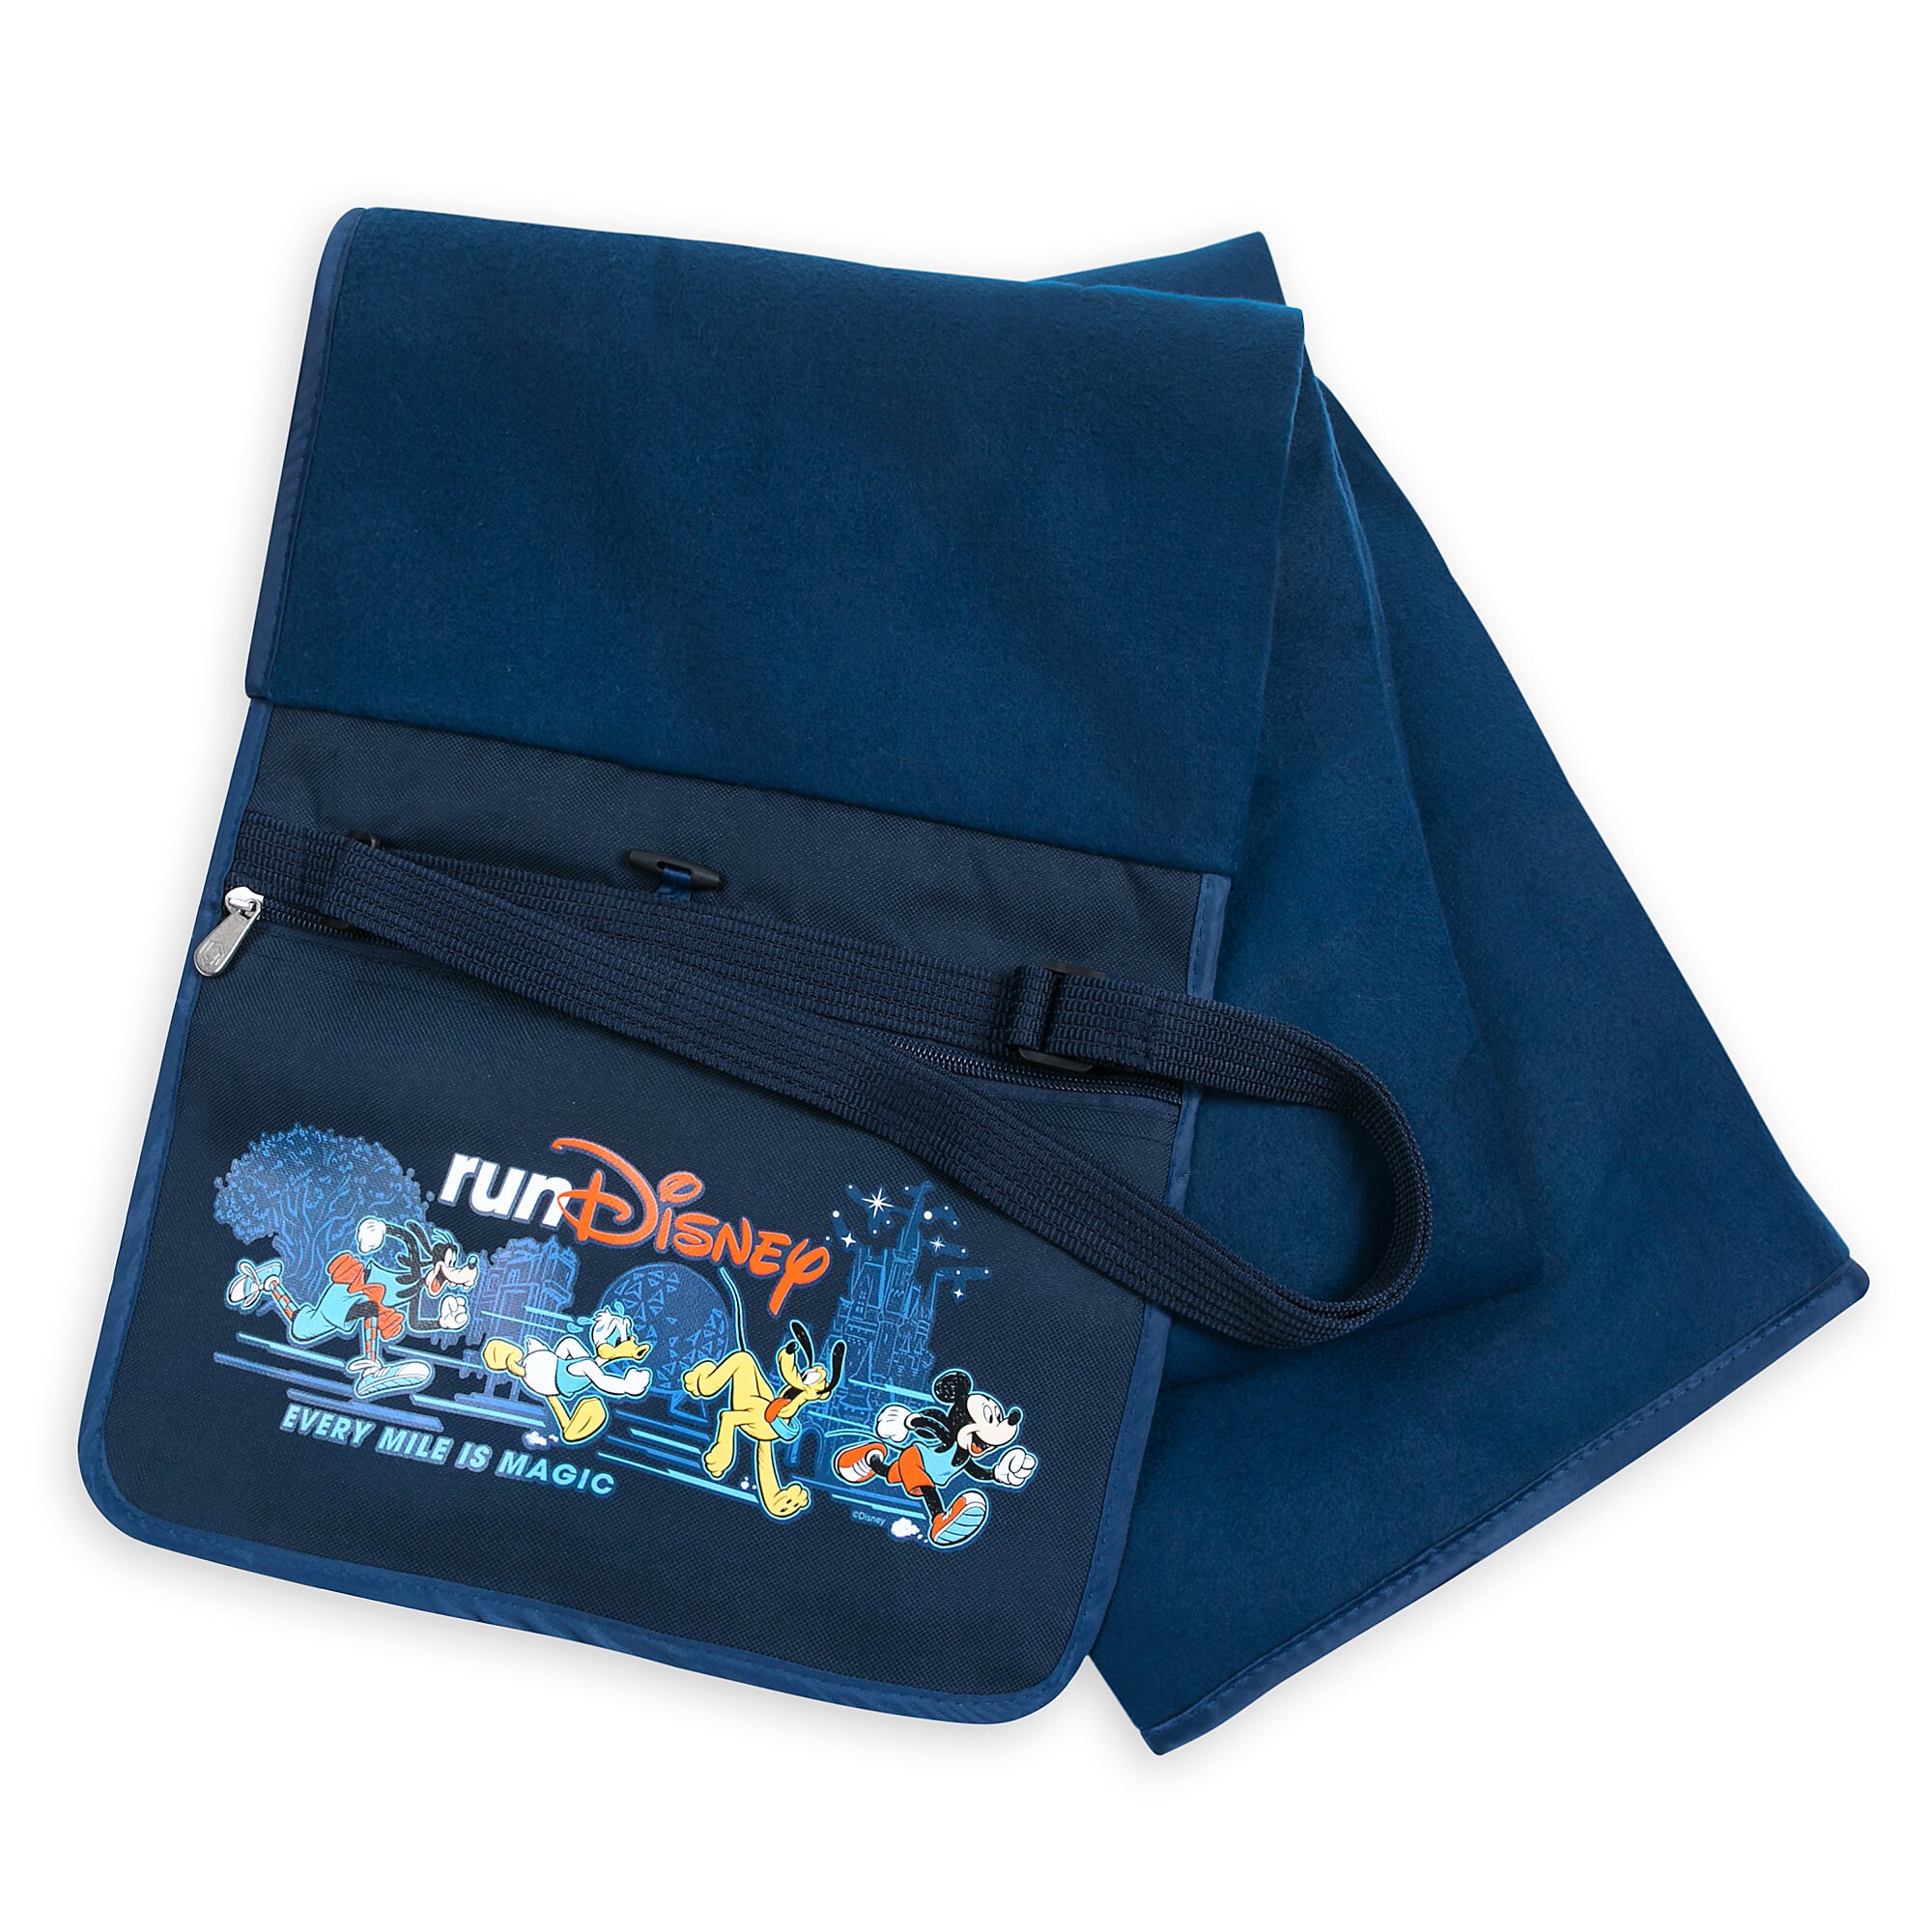 Mickey Mouse and Friends runDisney Outdoor Blanket